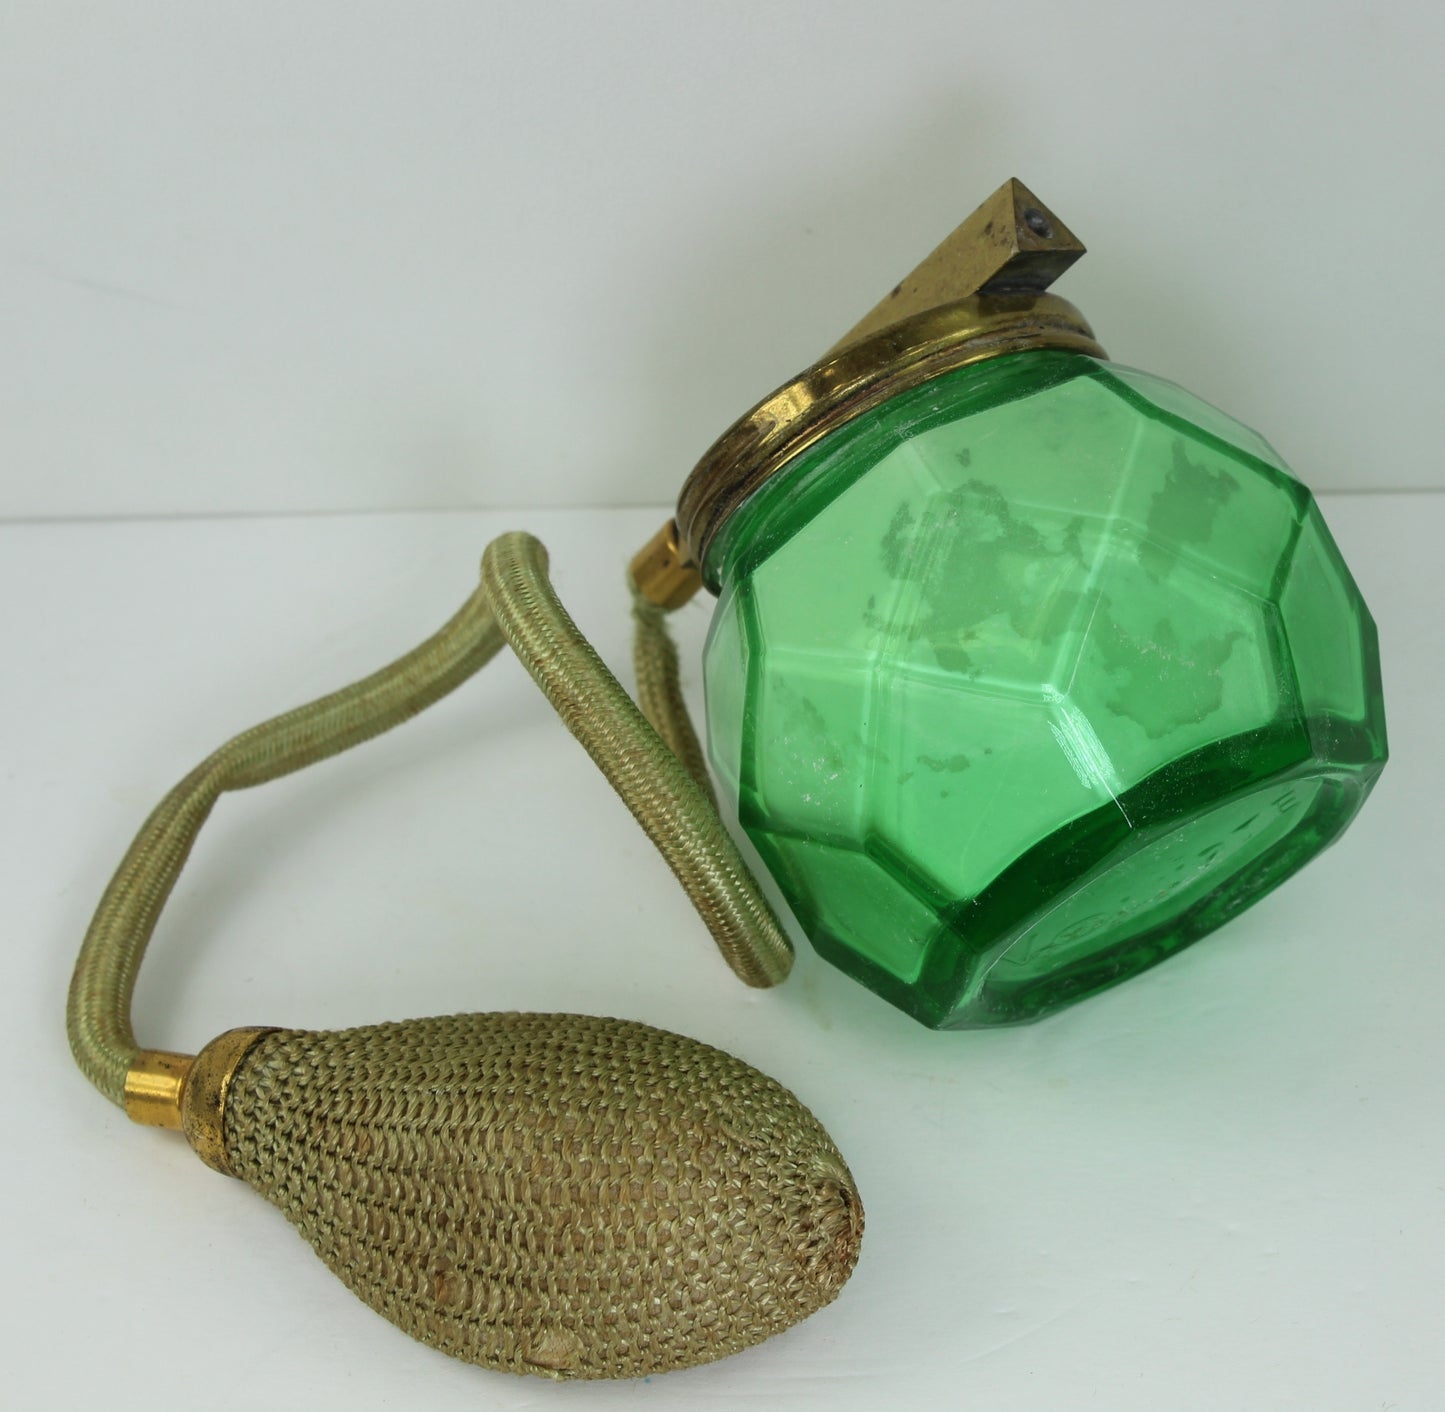 Extremely Rare Antique 1930s Volupte Spray Body Powder Atomizer Green Glass Powder Filled approx 3" wide